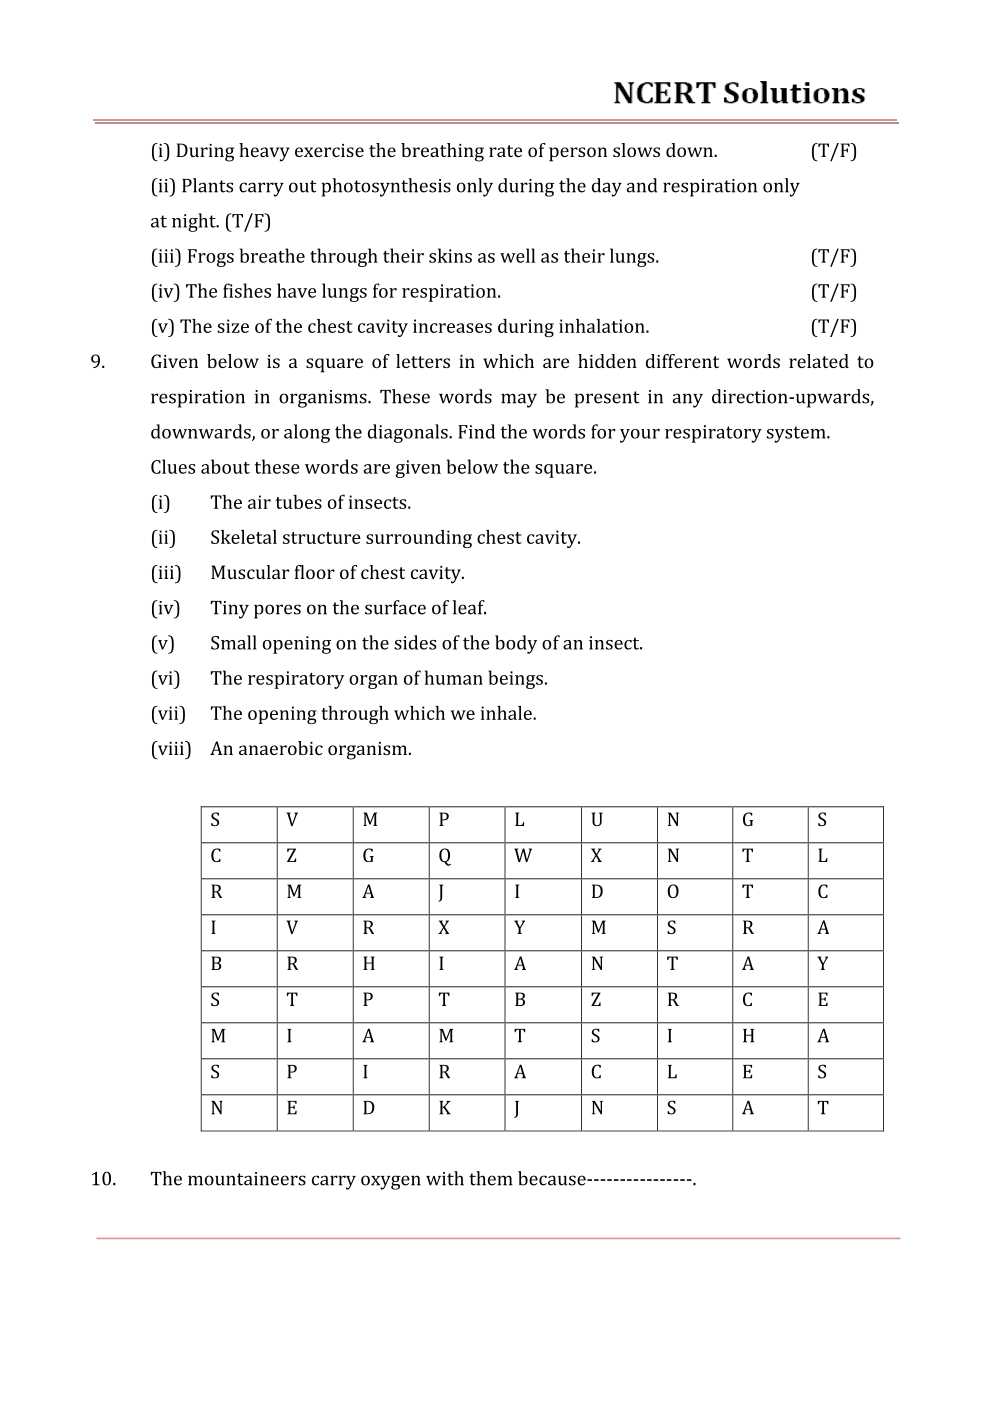 NCERT Solutions For Class 7 science Chapter 10 Respiration in Organisms